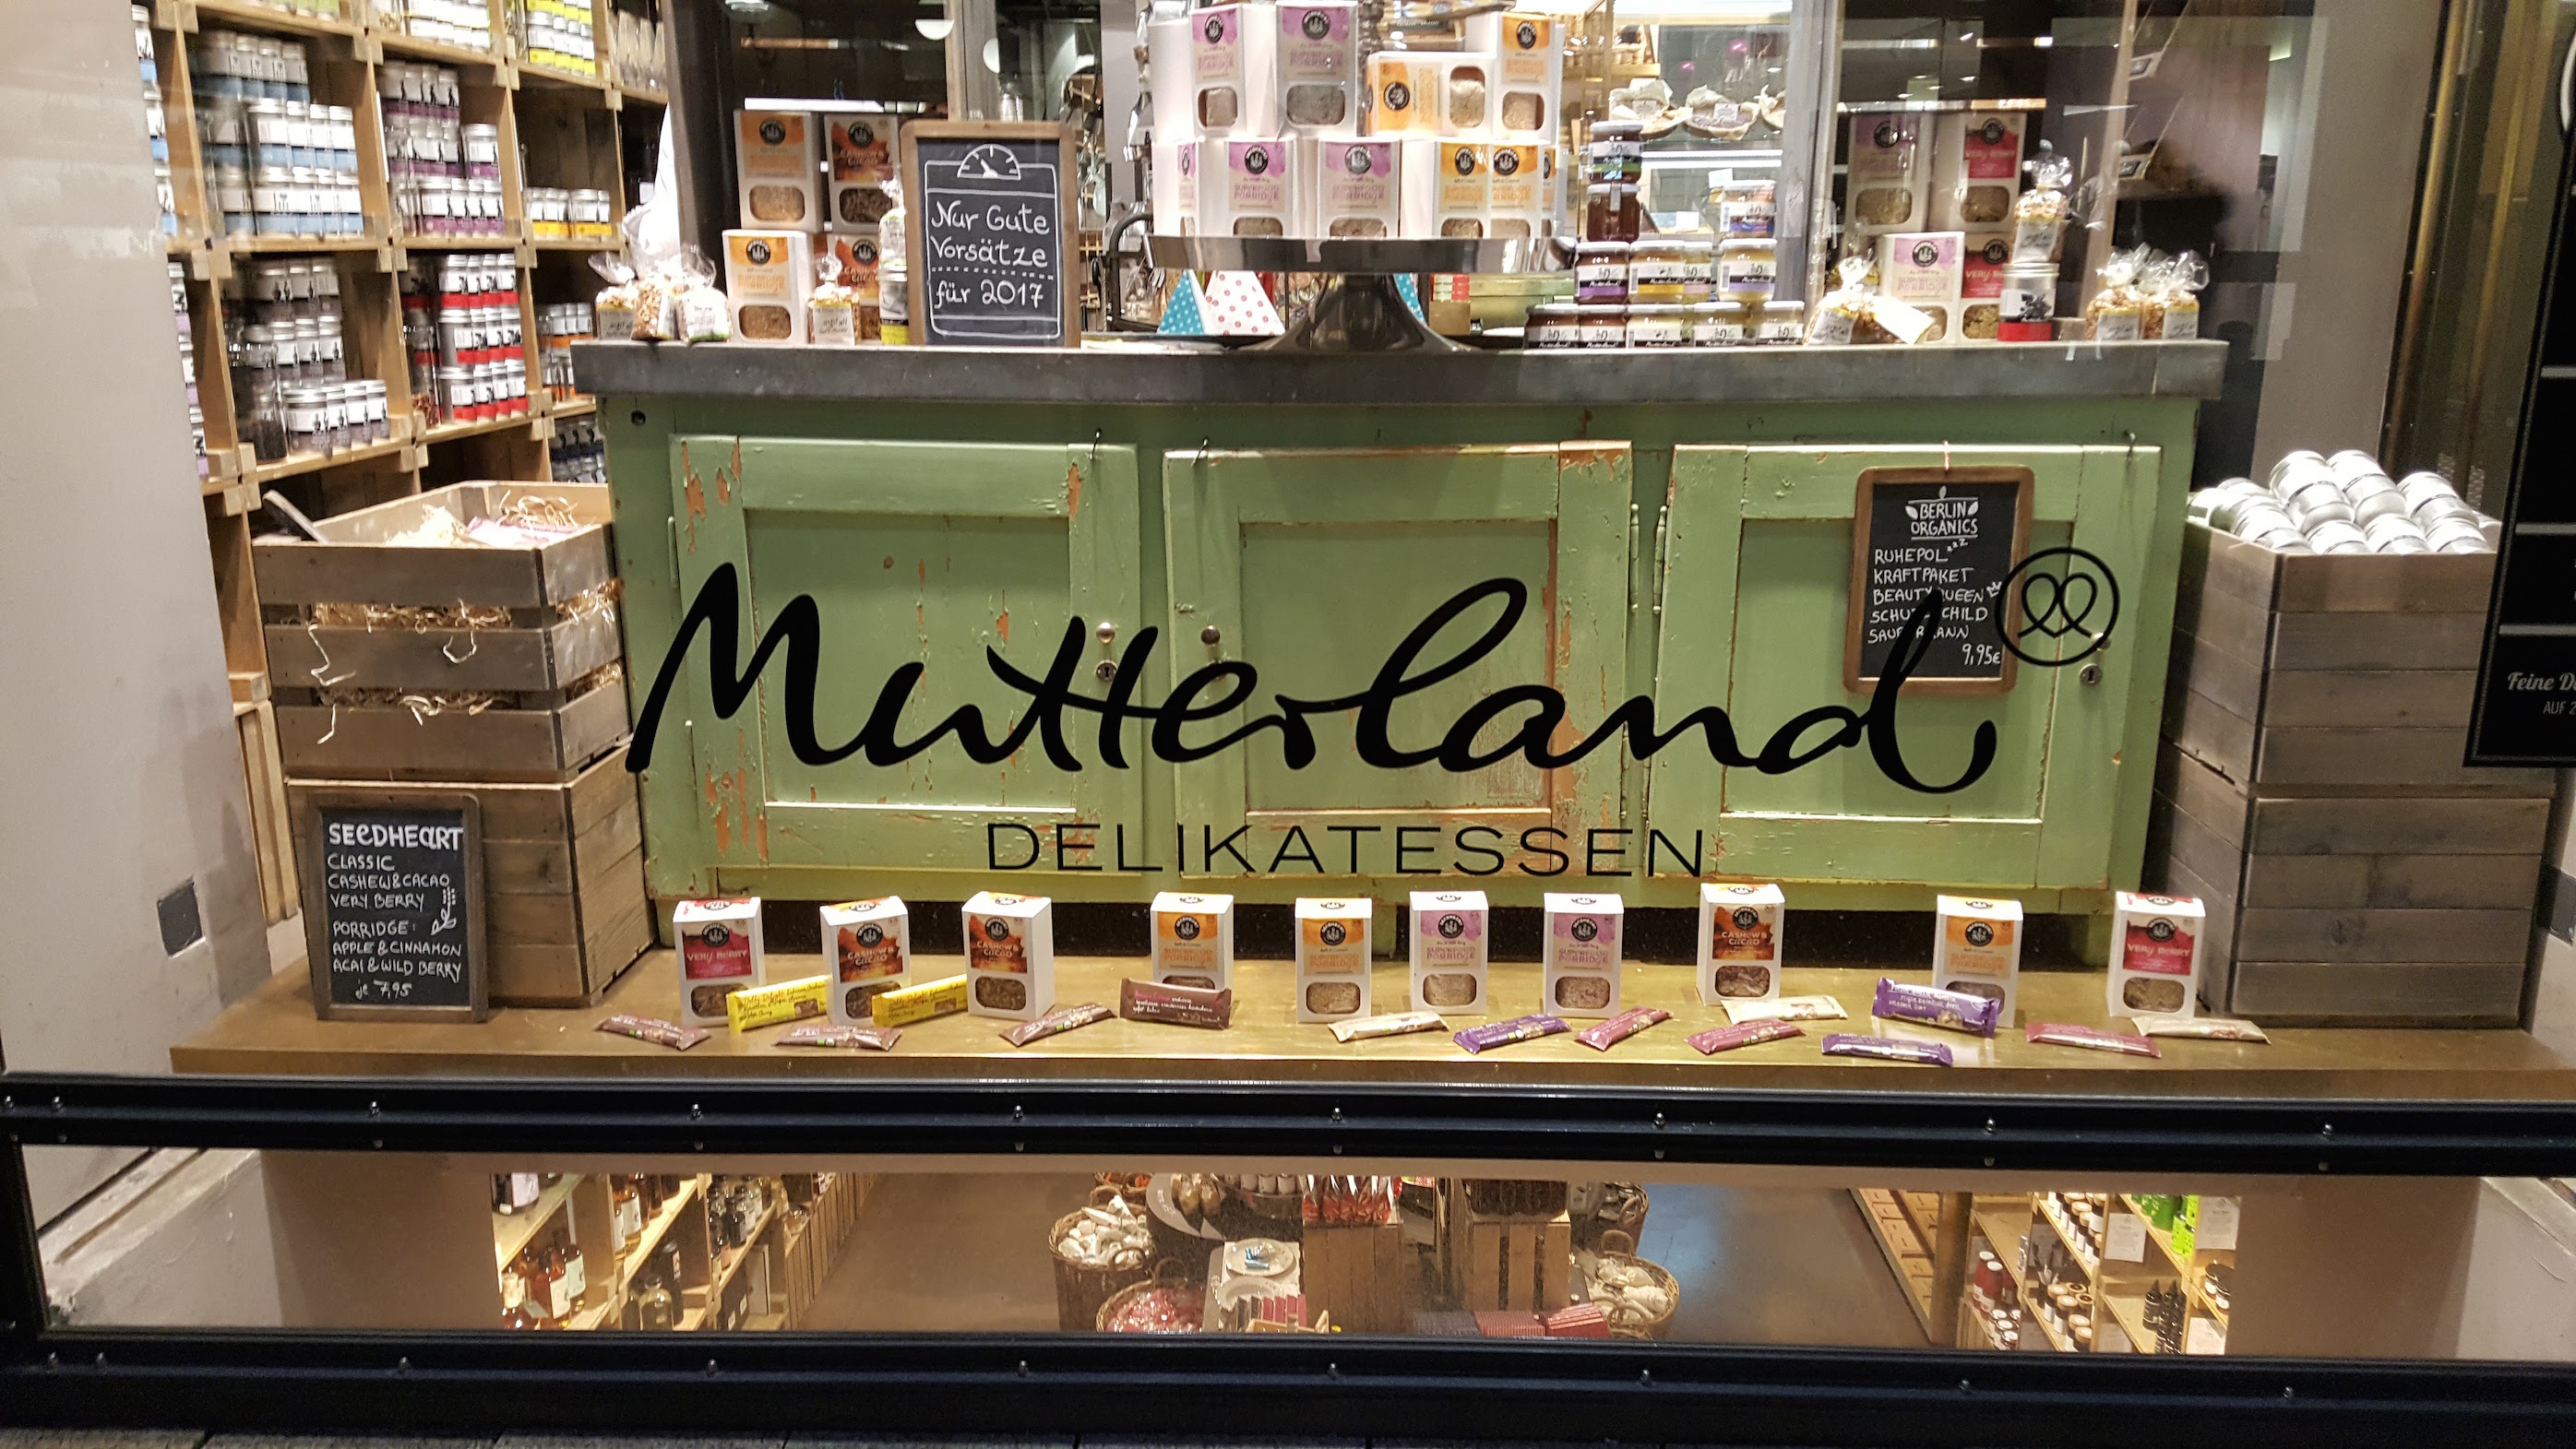 A sweets shop in Hamburg. Yes, I bought chocolate. Photo: Me.